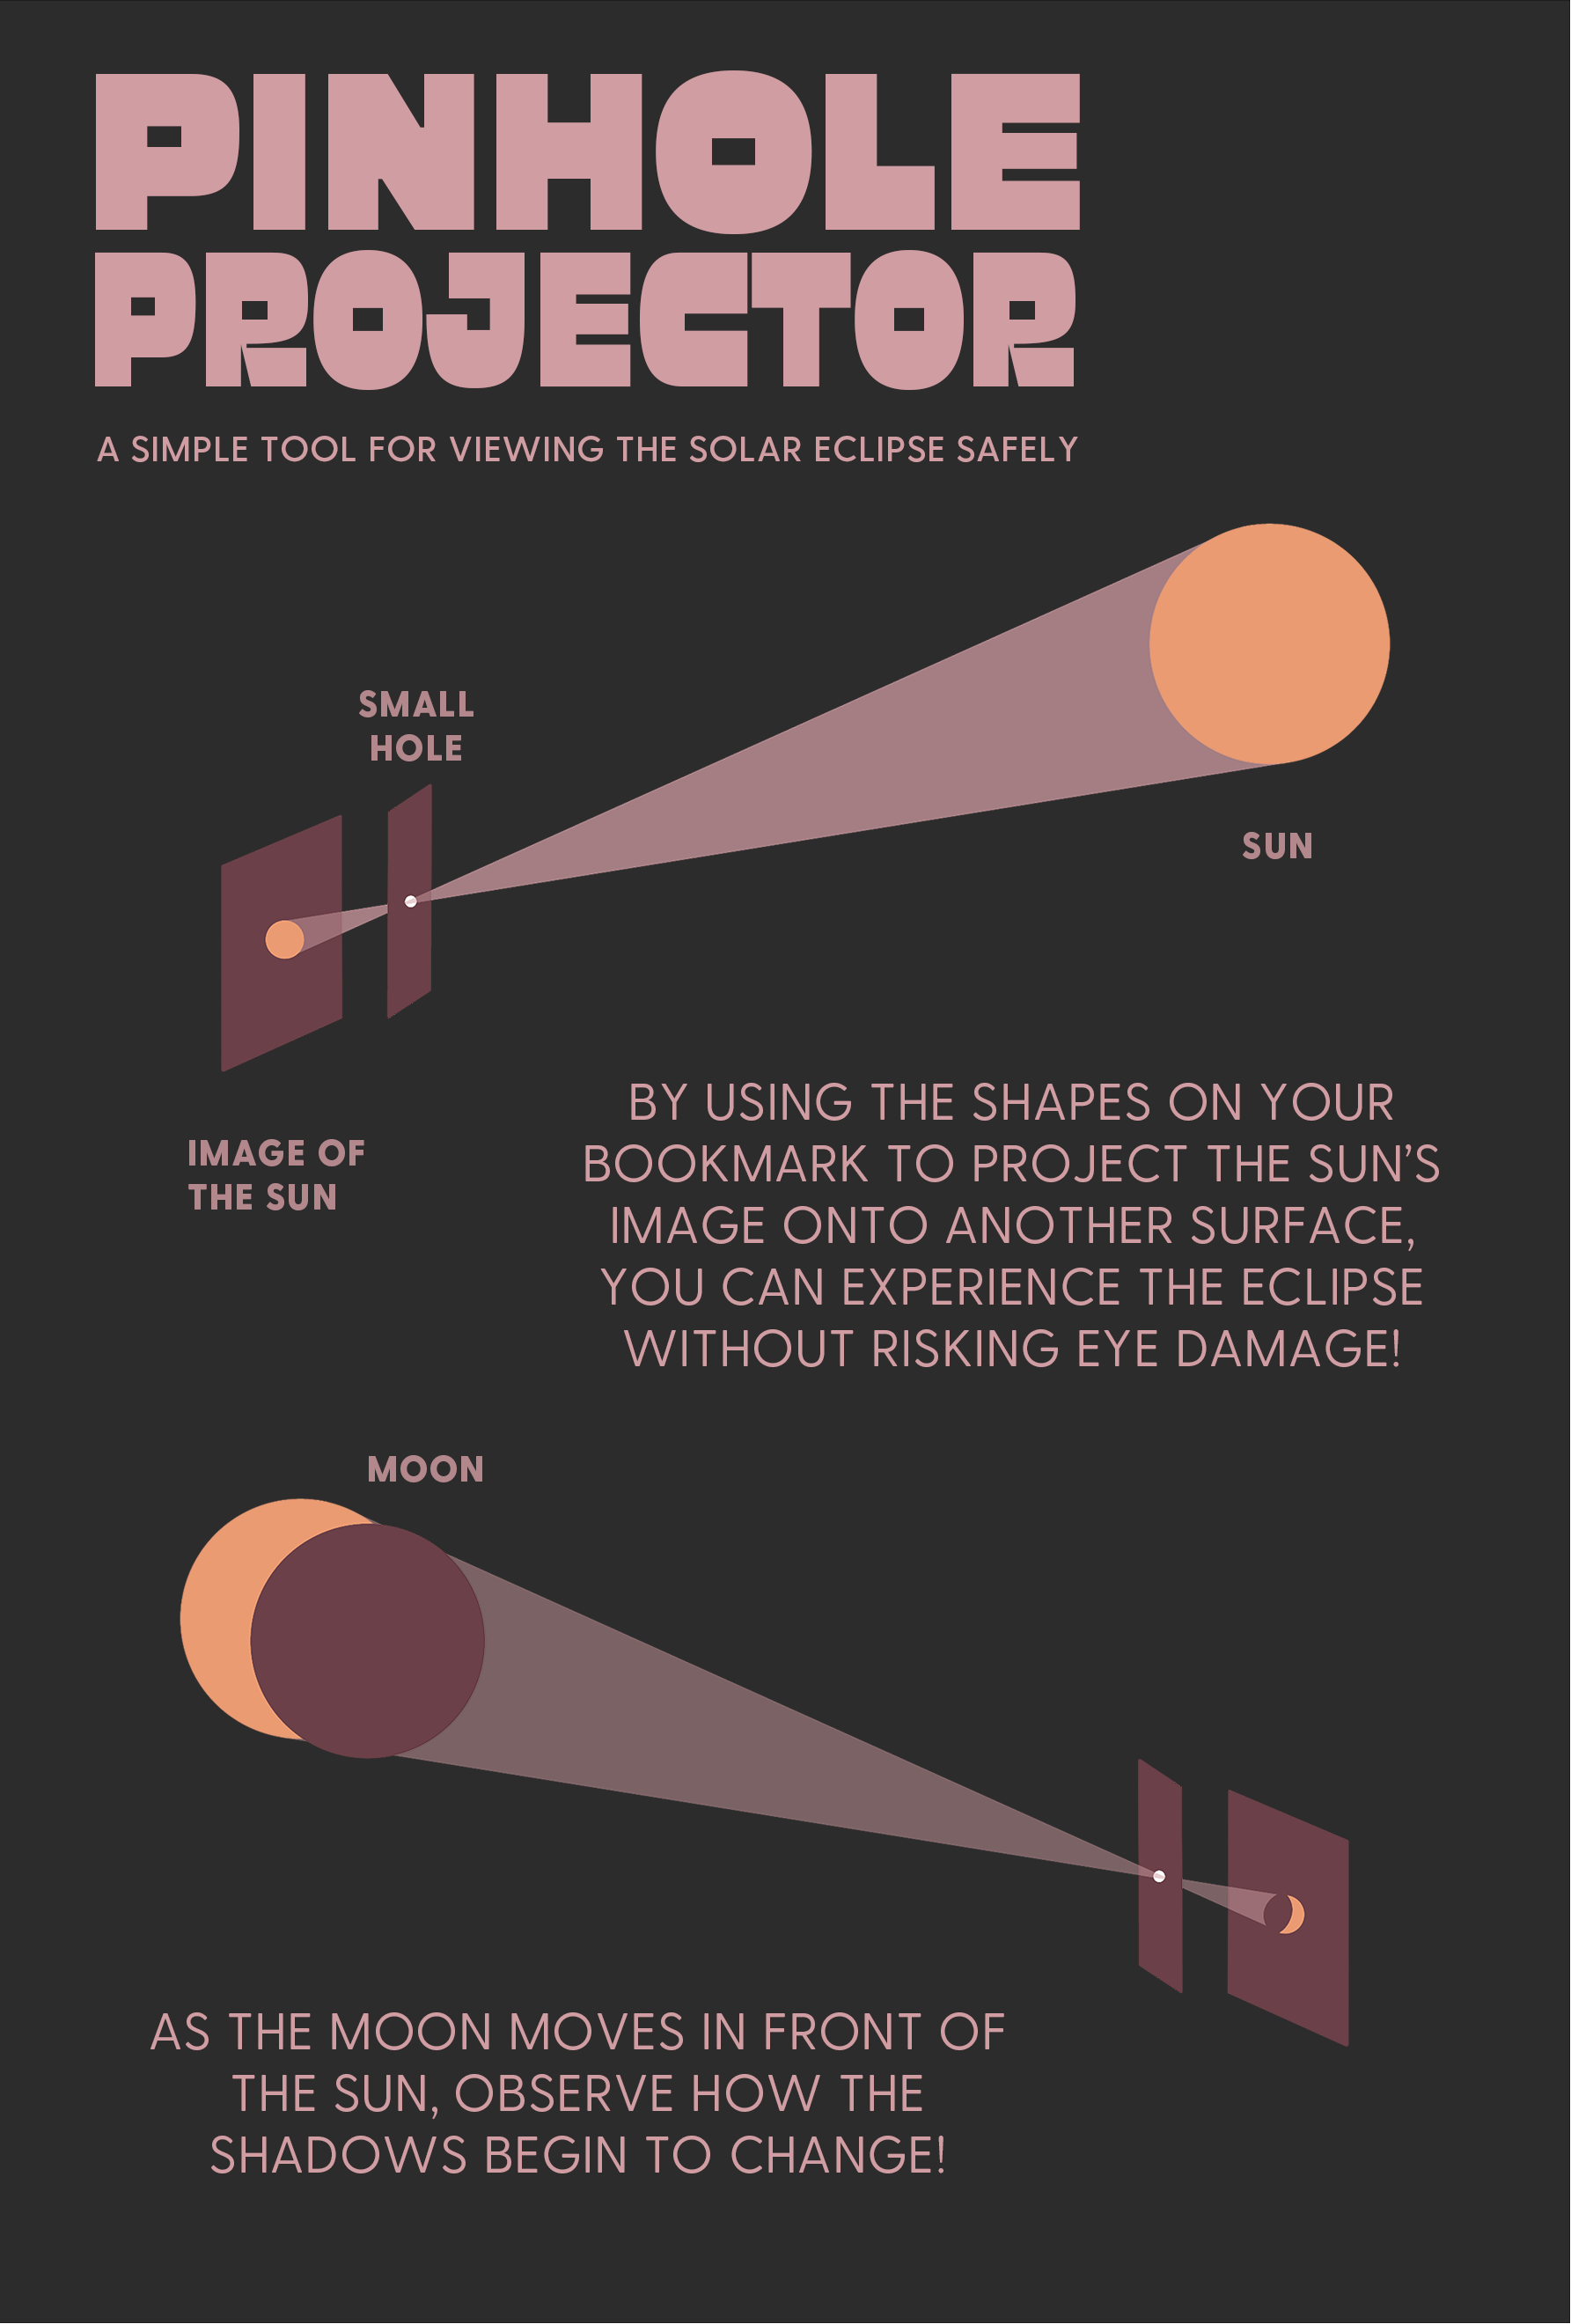 How to safely view a solar eclipse